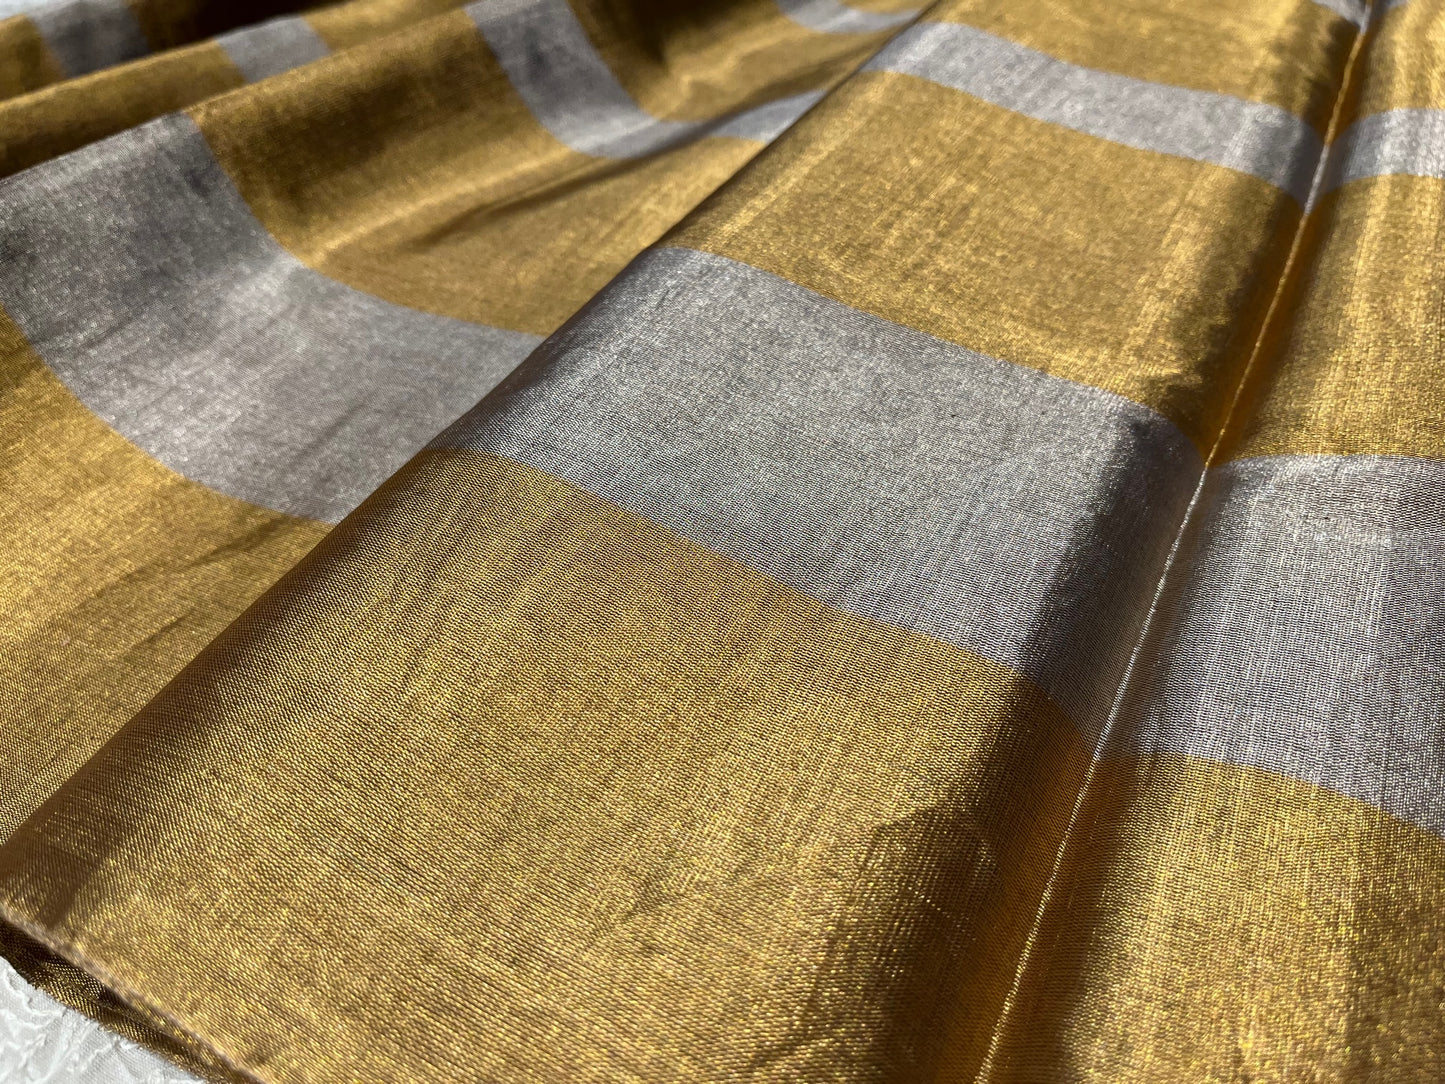 GOLDEN & SILVER STRIPED PURE CHANDERI TISSUE HANDLOOM SAREE WITHOUT BLOUSE